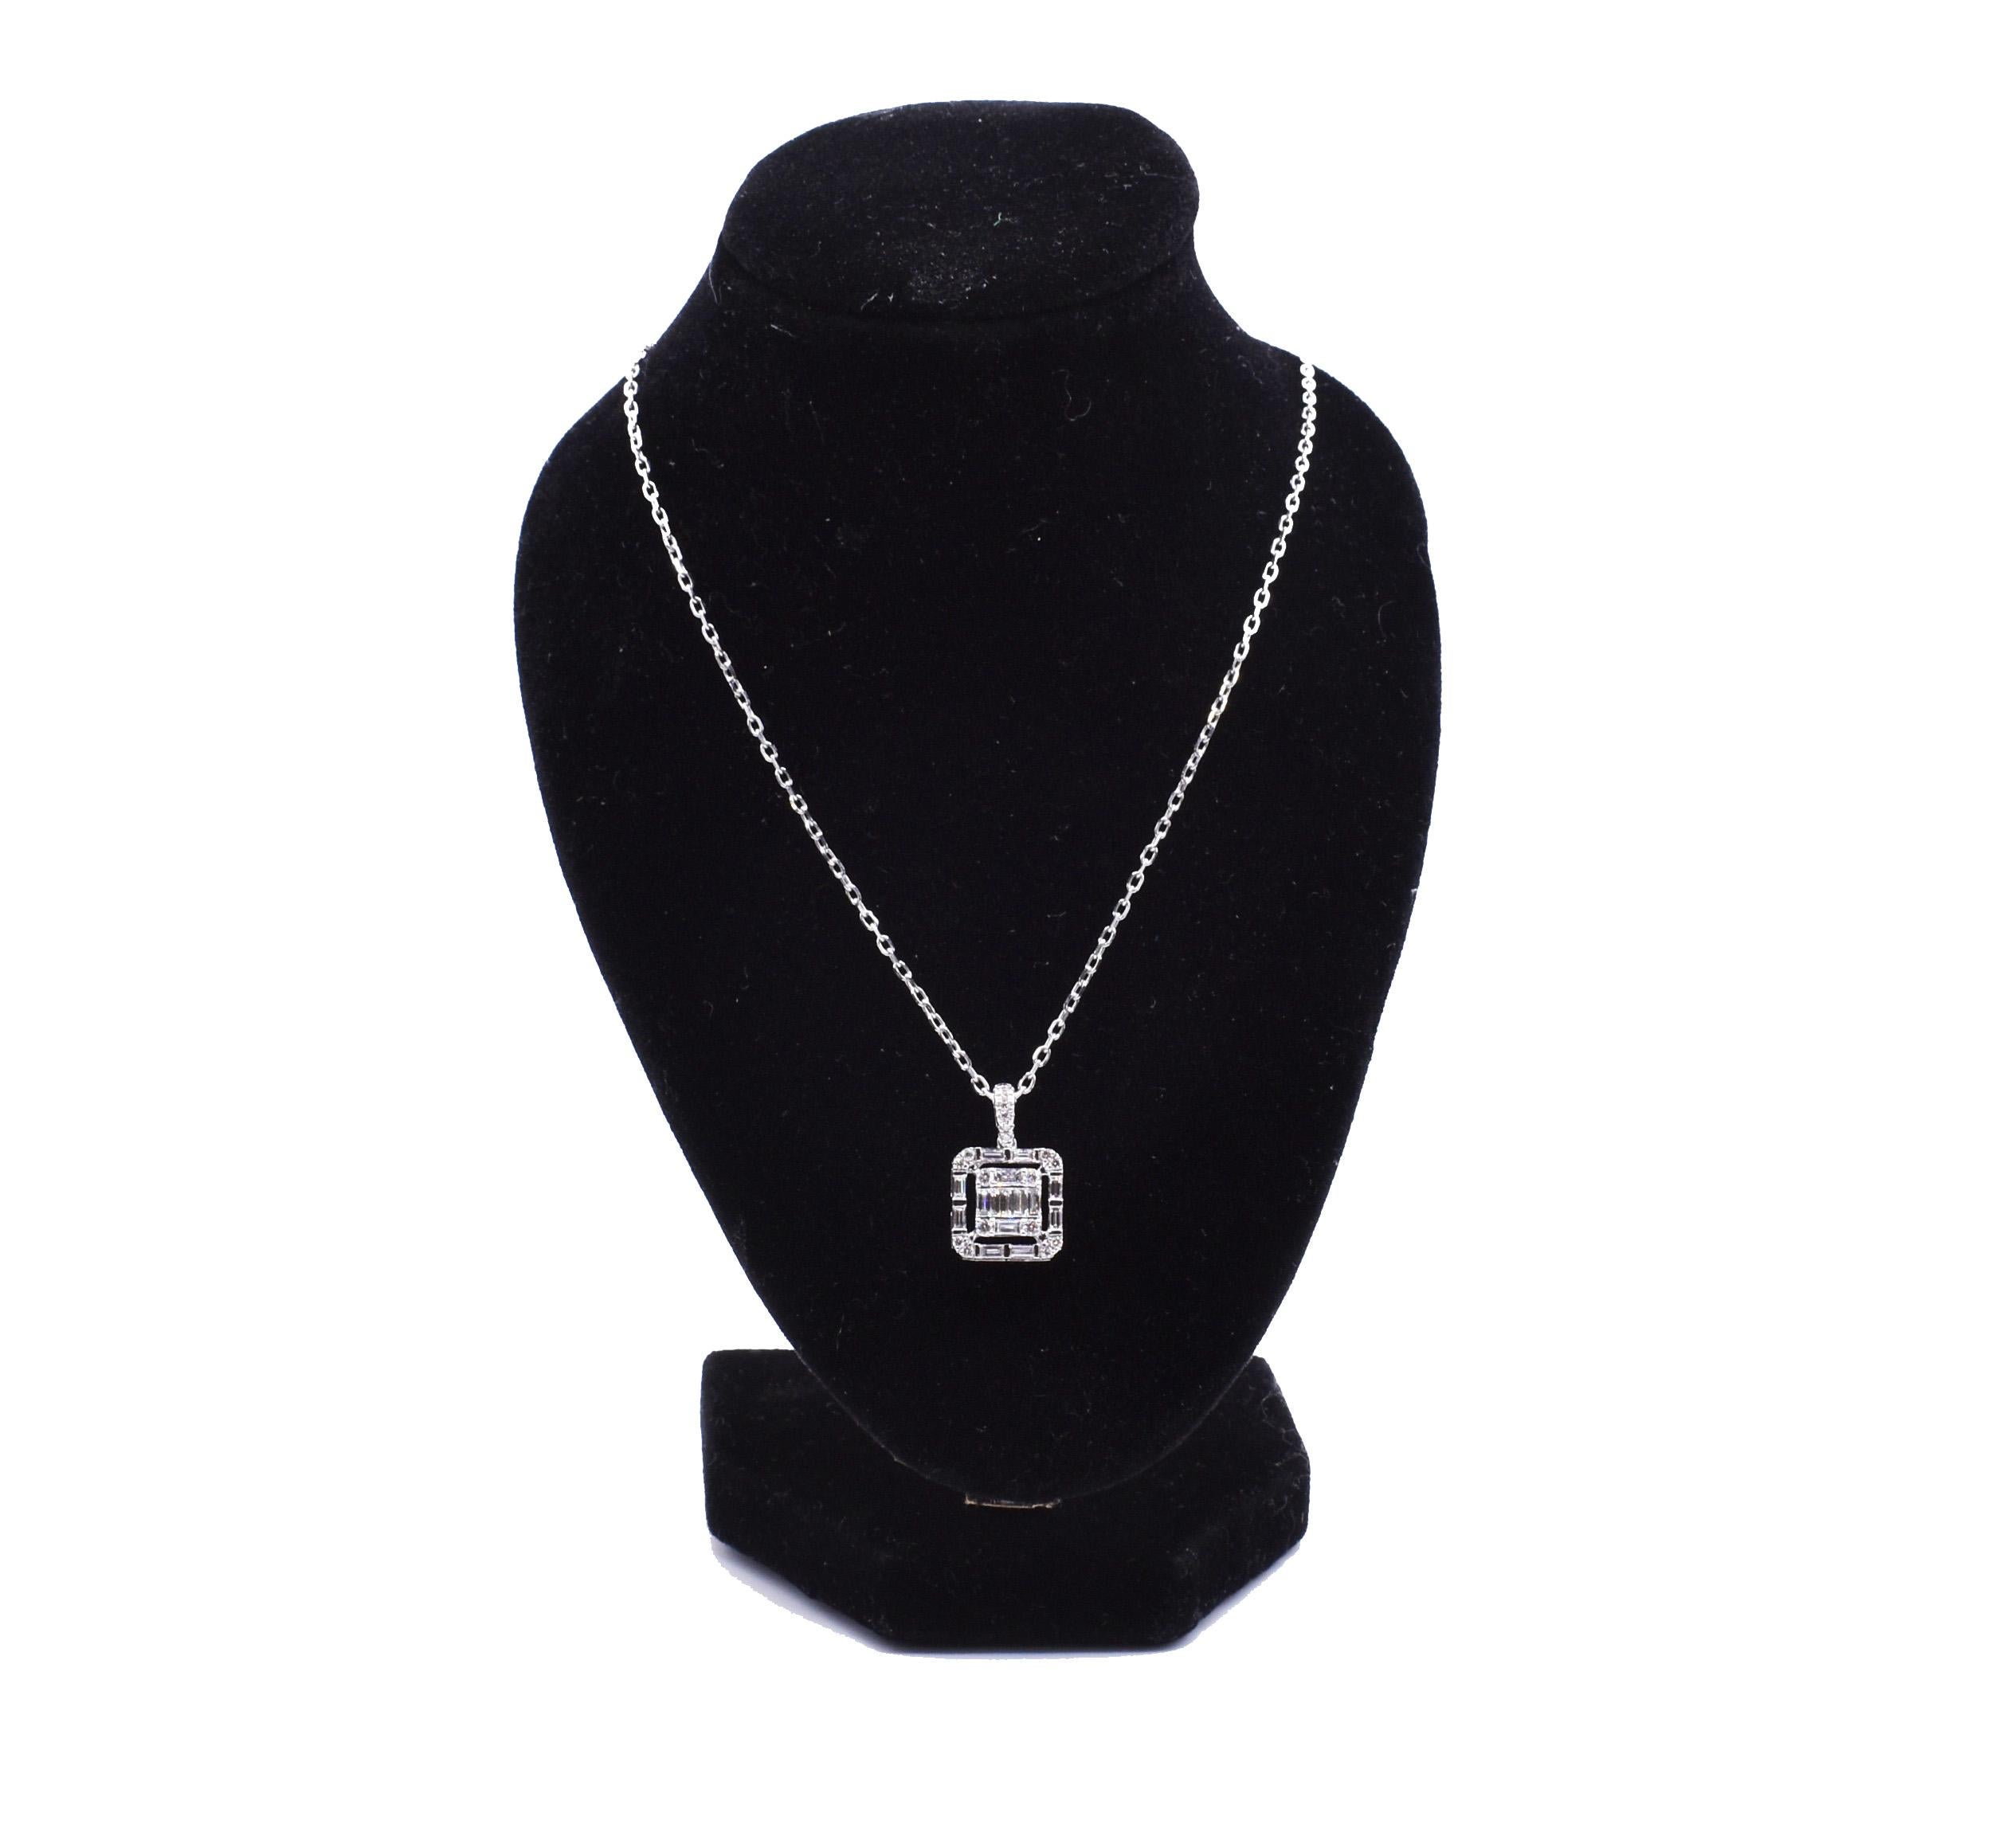 A splendid 18k white gold diamond necklace, featuring a series of baguette and round cut diamonds forming an art deco style pendant. 18 round cut diamonds = 0.20ct 14 baguette cut diamonds = 0.45ct. F/G colour VS clarity. Total diamond weight =